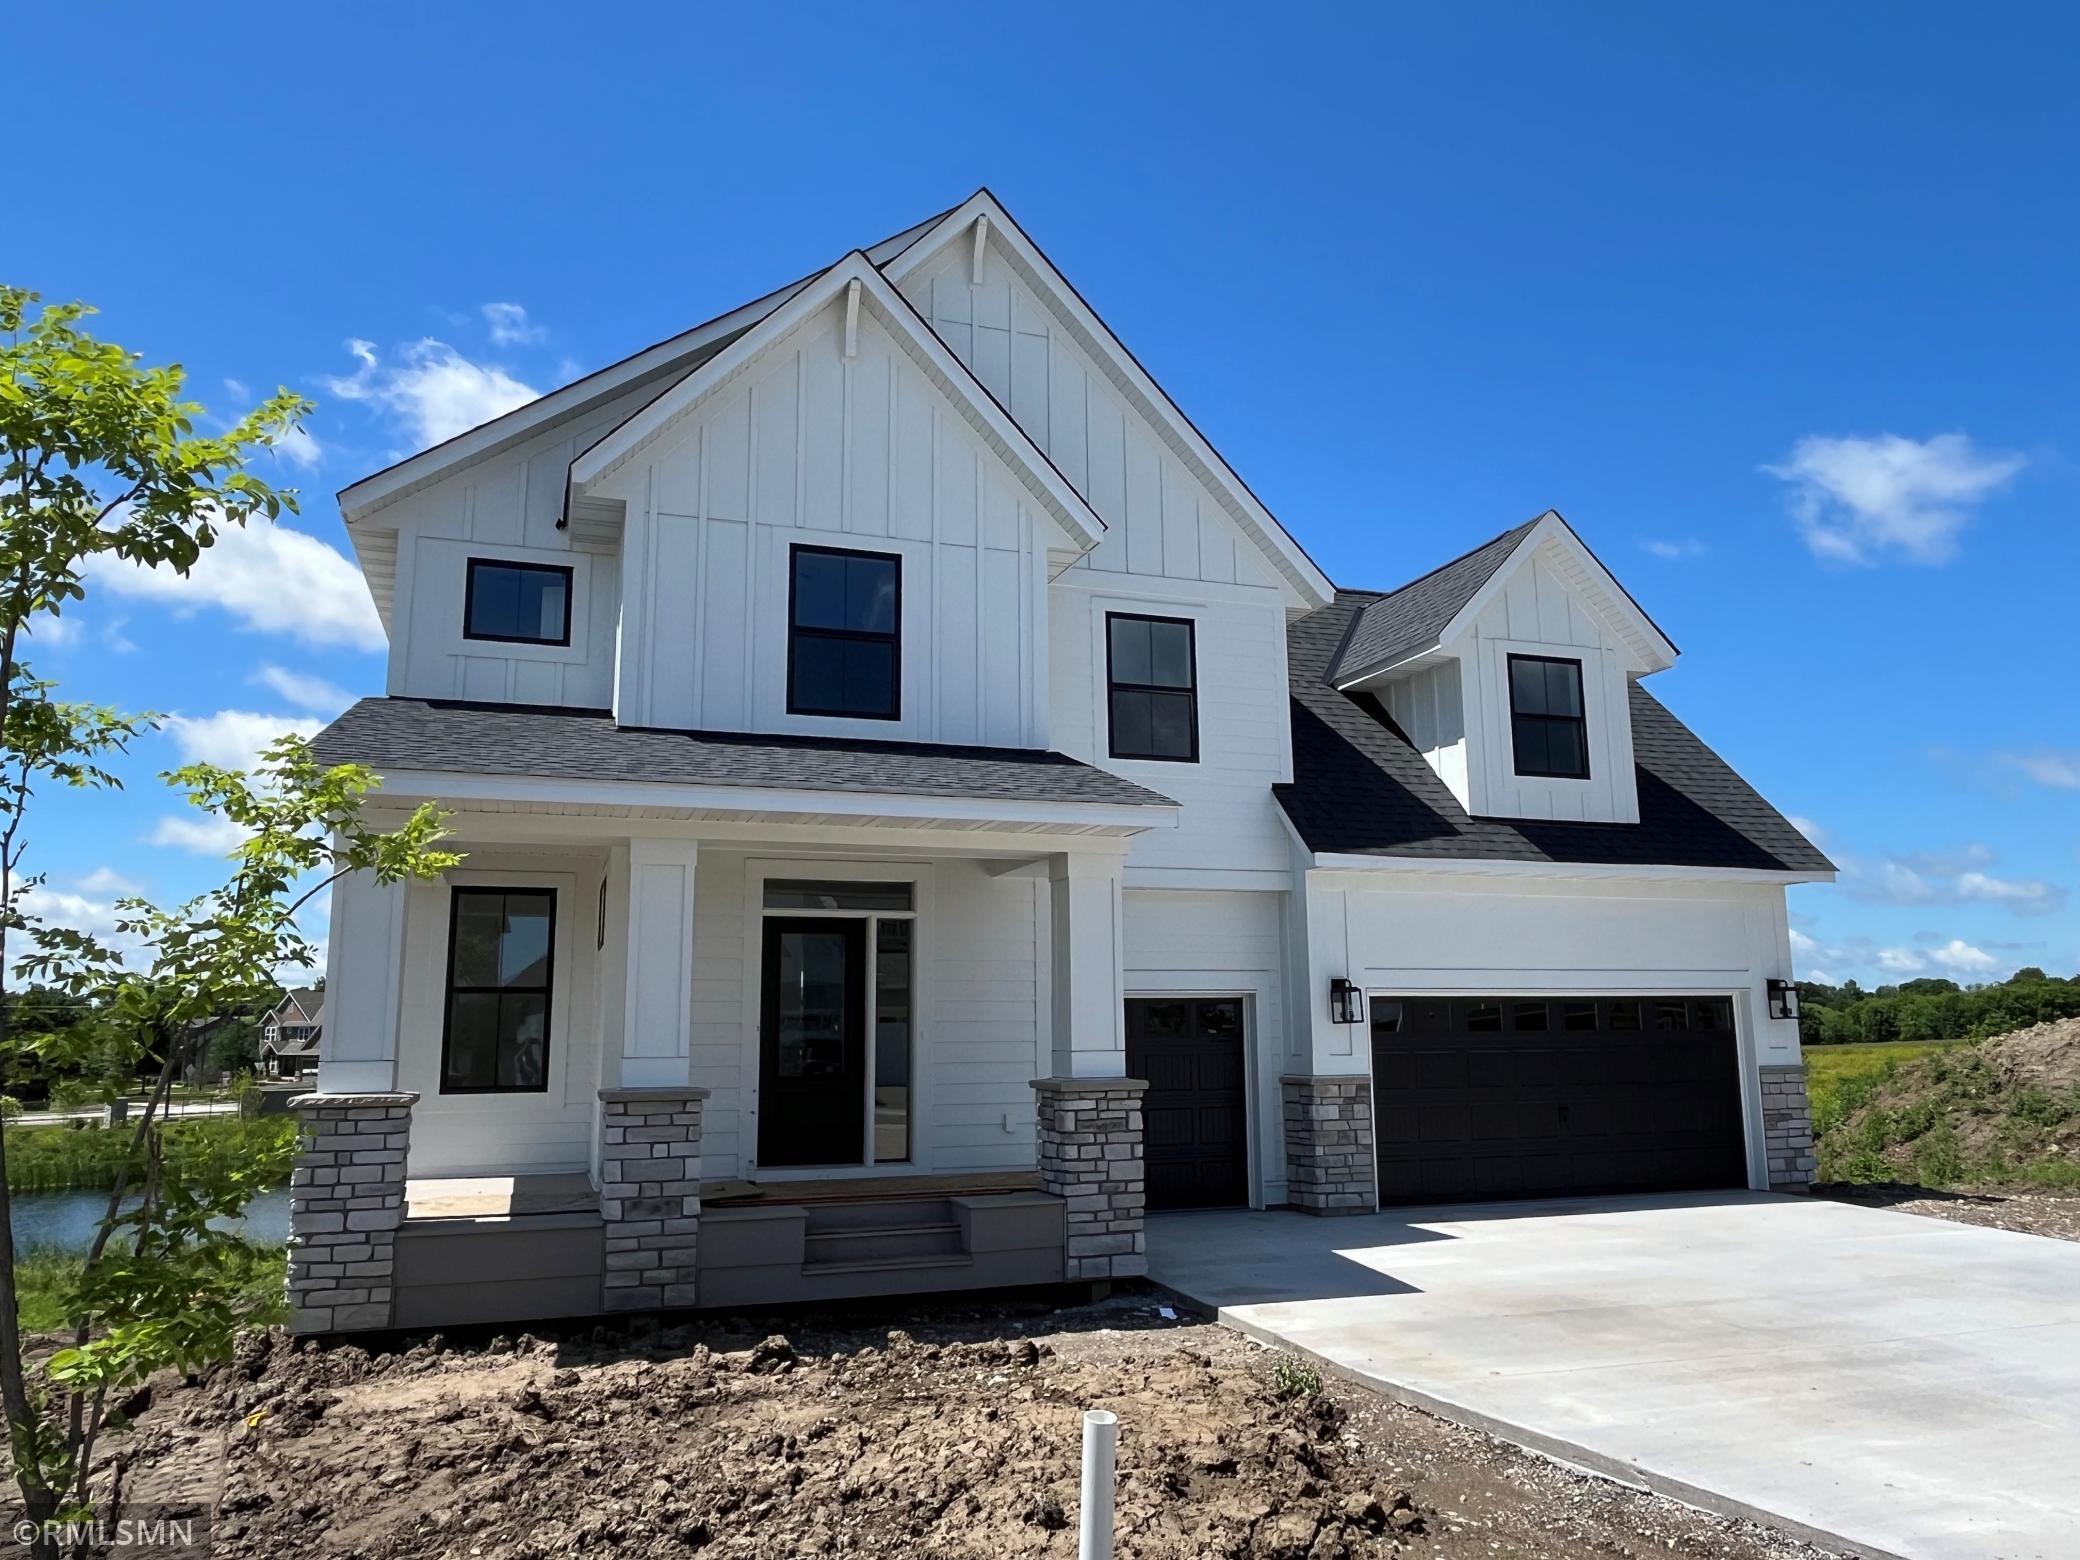 Completed and ready to go! Birchwood Sport by Robert Thomas Homes. Price includes irrigation, landscaping, and sod